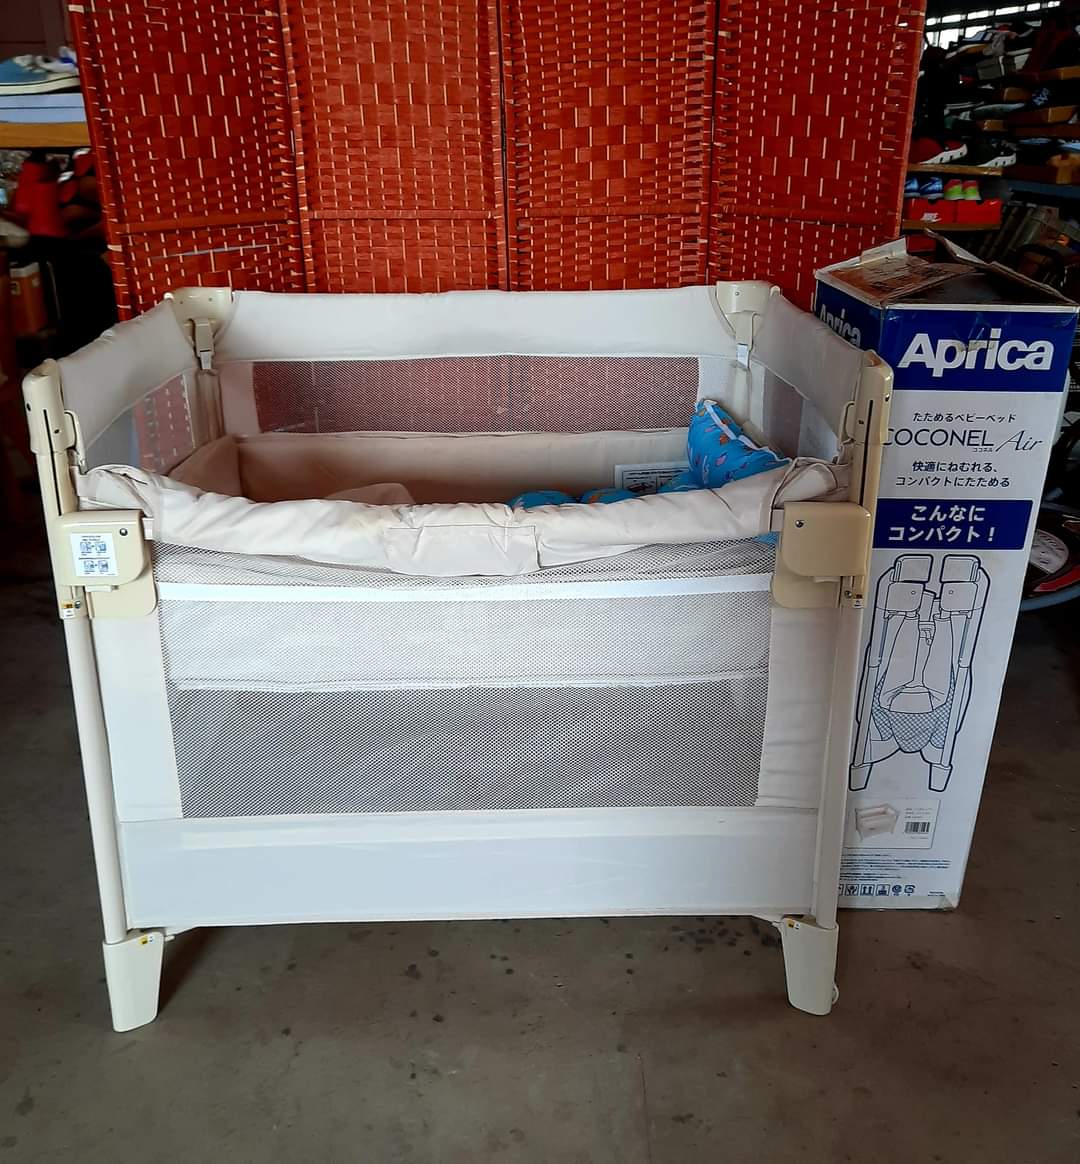 FOR SALE!!!! Aprica Coconel Air 0-24m Newborn Crib & Toddler Play